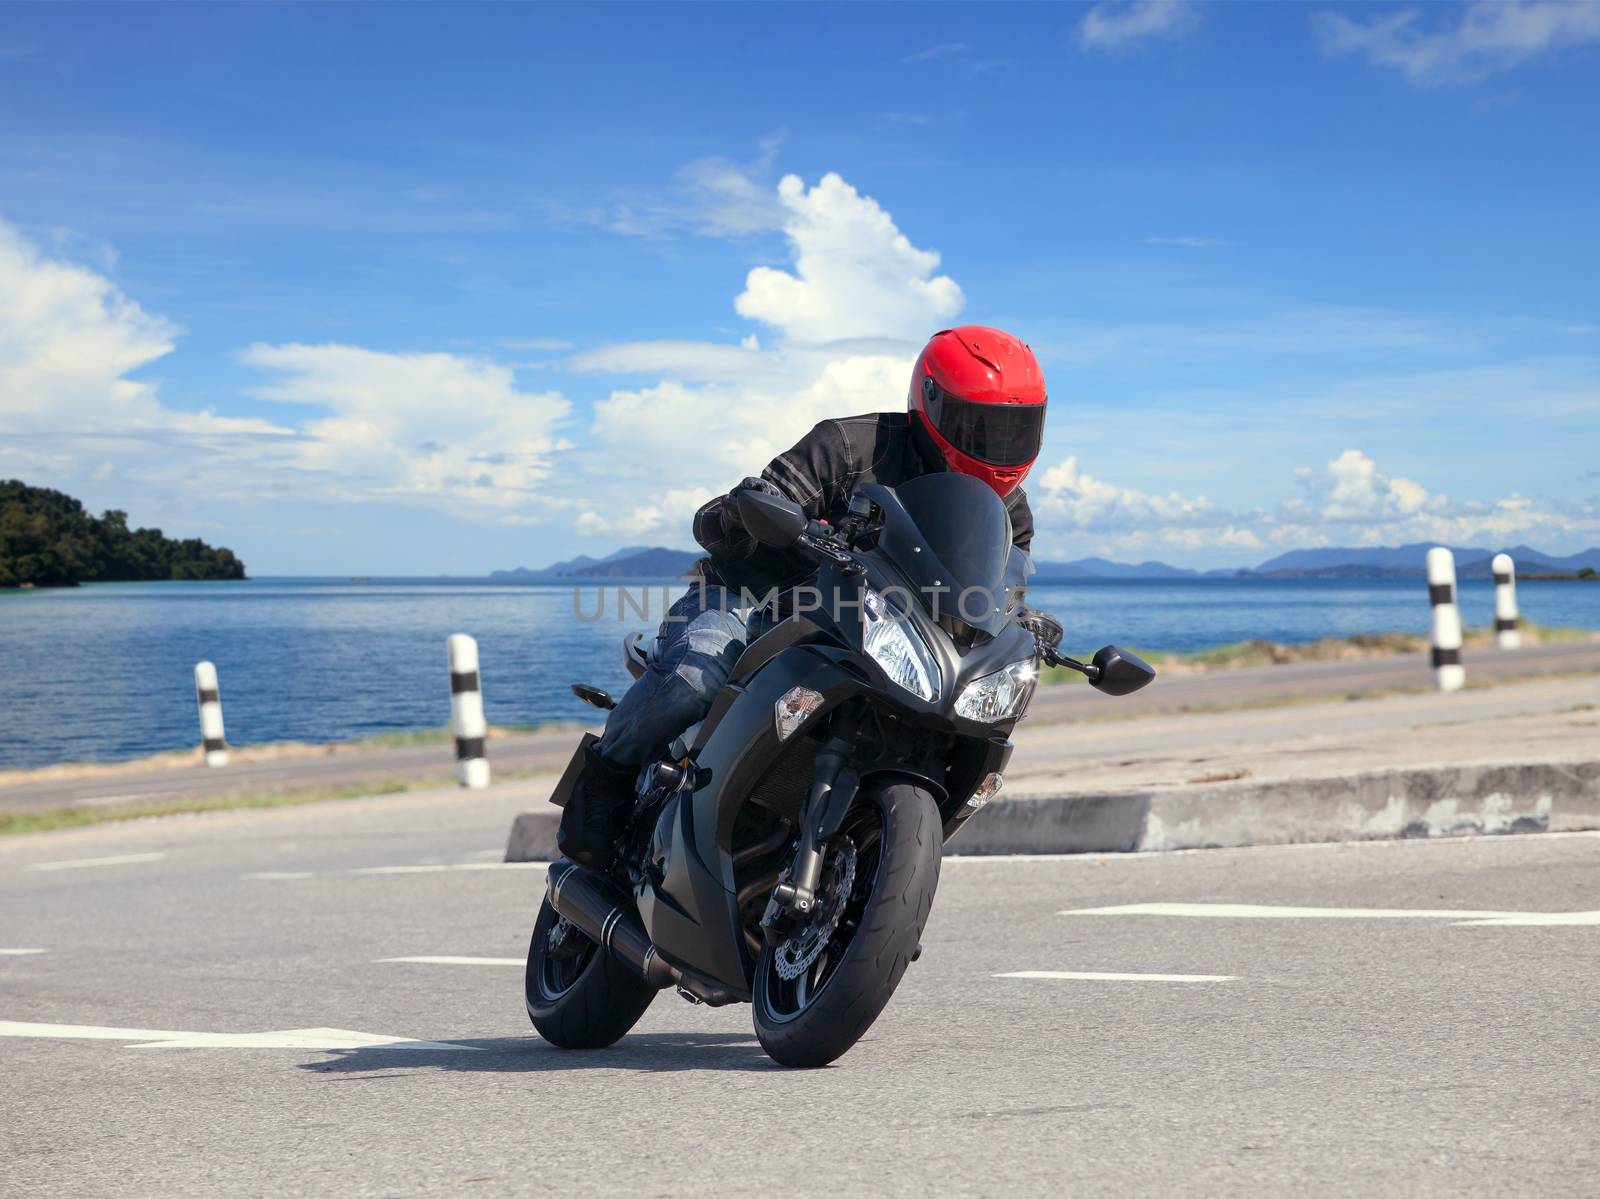 young man riding big bike motorcycle against sharp curve of asphalt high ways road with rural lake scene use for male adventure activities and motor sport hobby on holiday vacation